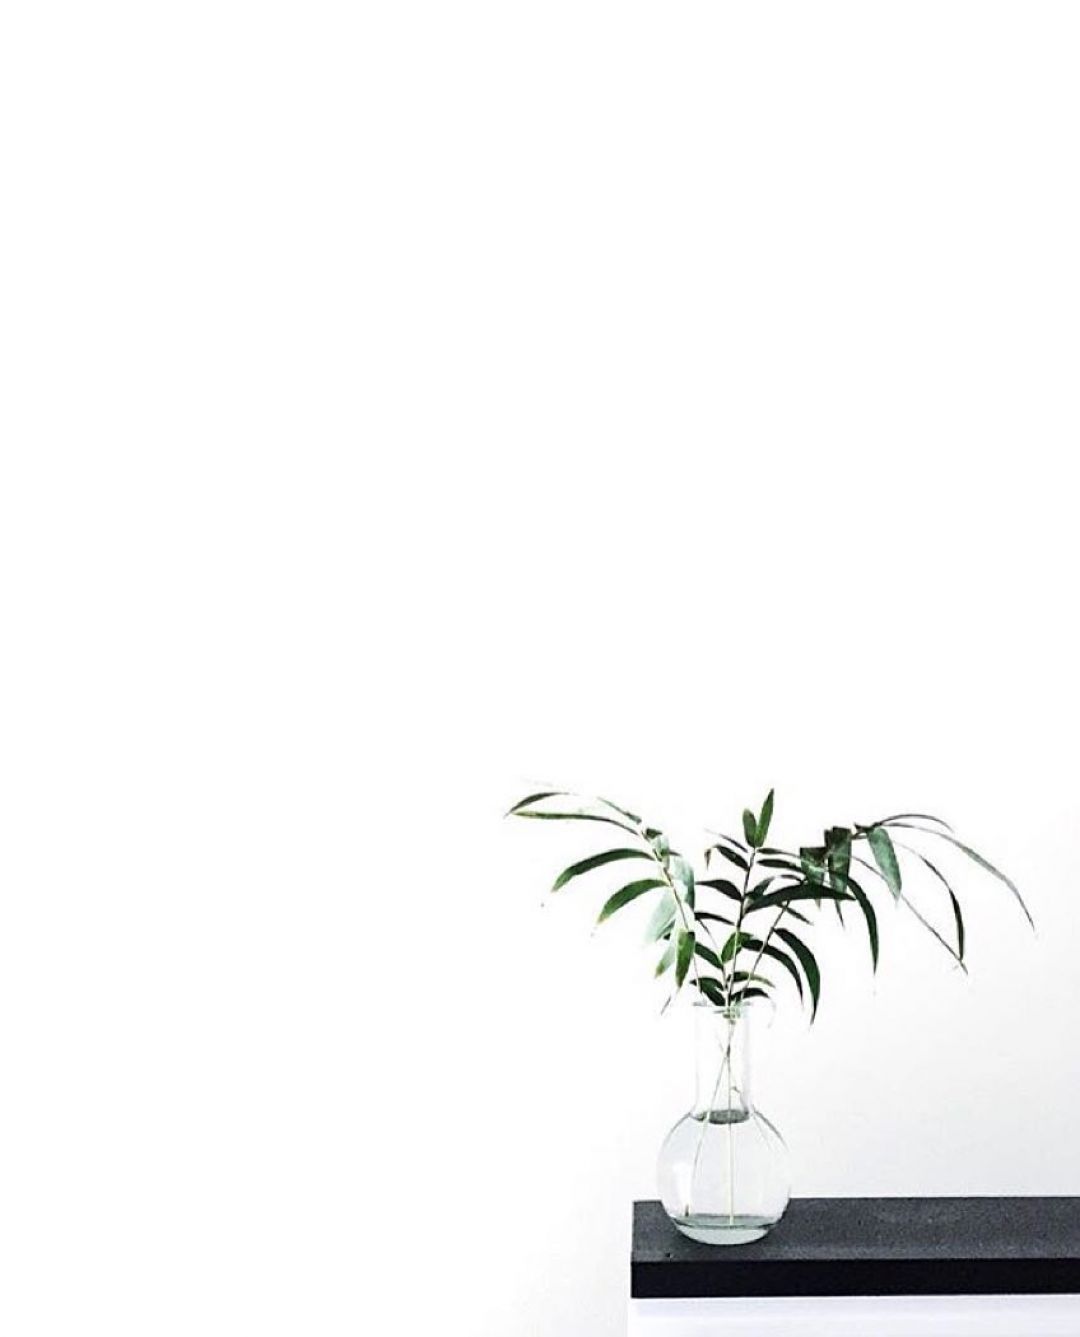 Free download White Aesthetic Plants Wallpaper Top White